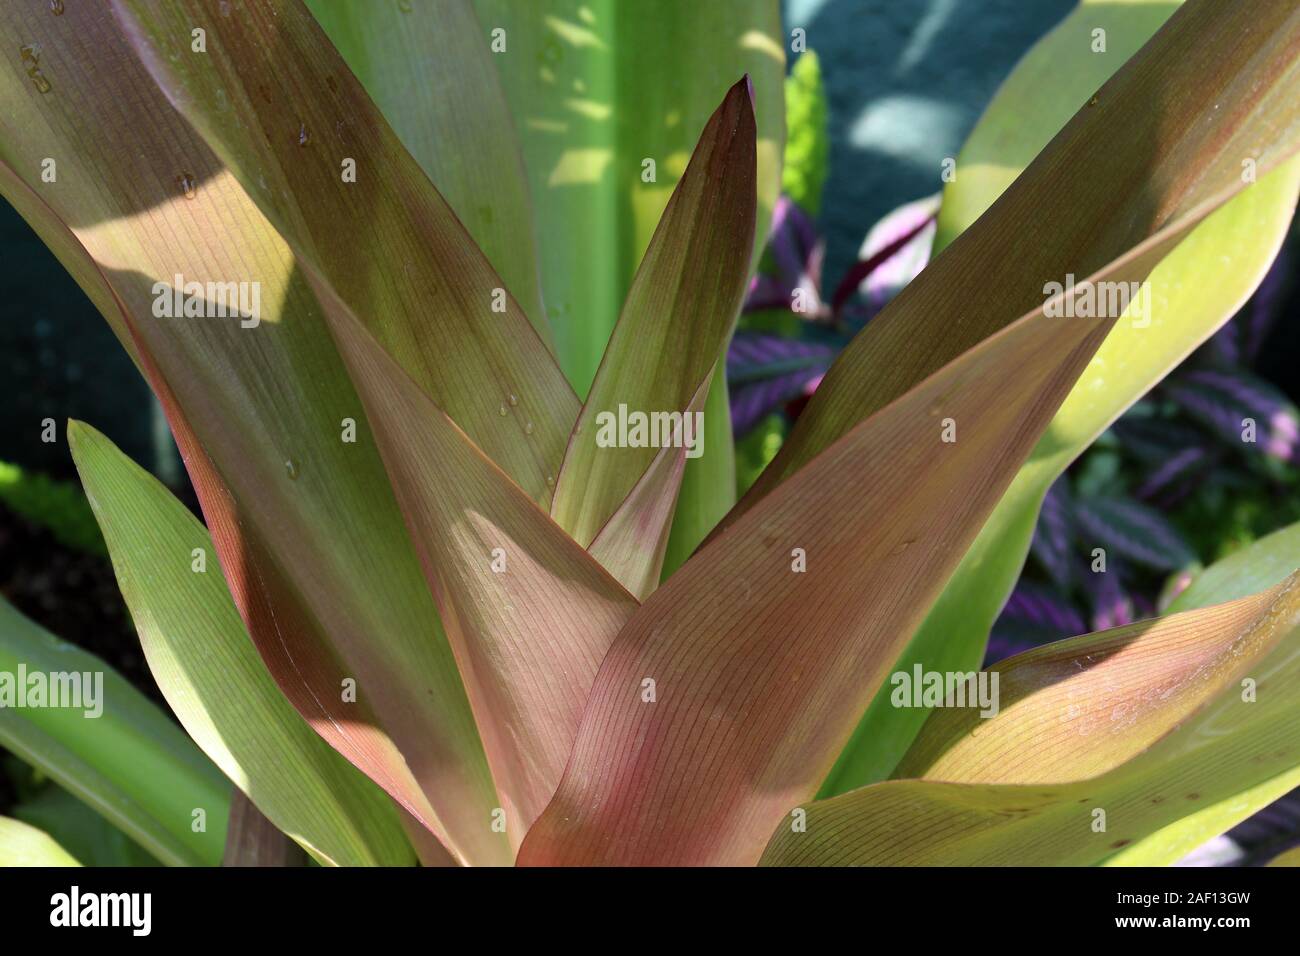 Close up of the leaves of a Purple Queen Lily, Crinum asiaticum, with water droplets Stock Photo